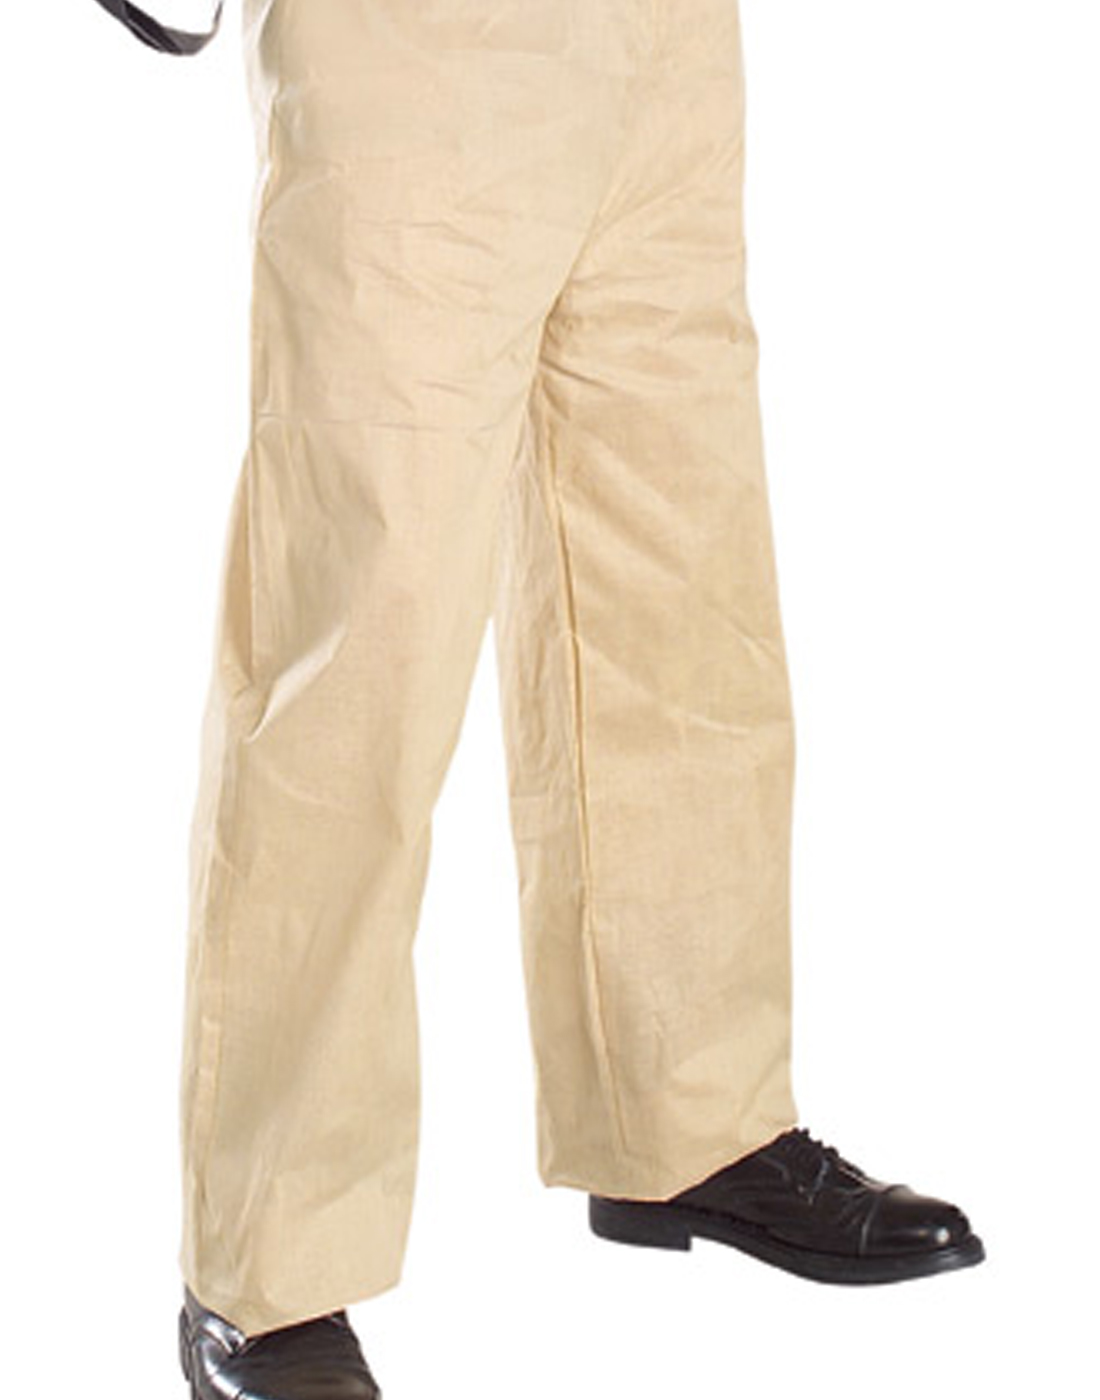 Rubie's Ghostbusters Peter Venkman Men's Halloween Fancy-Dress Costume for Adult, One Size - image 3 of 4